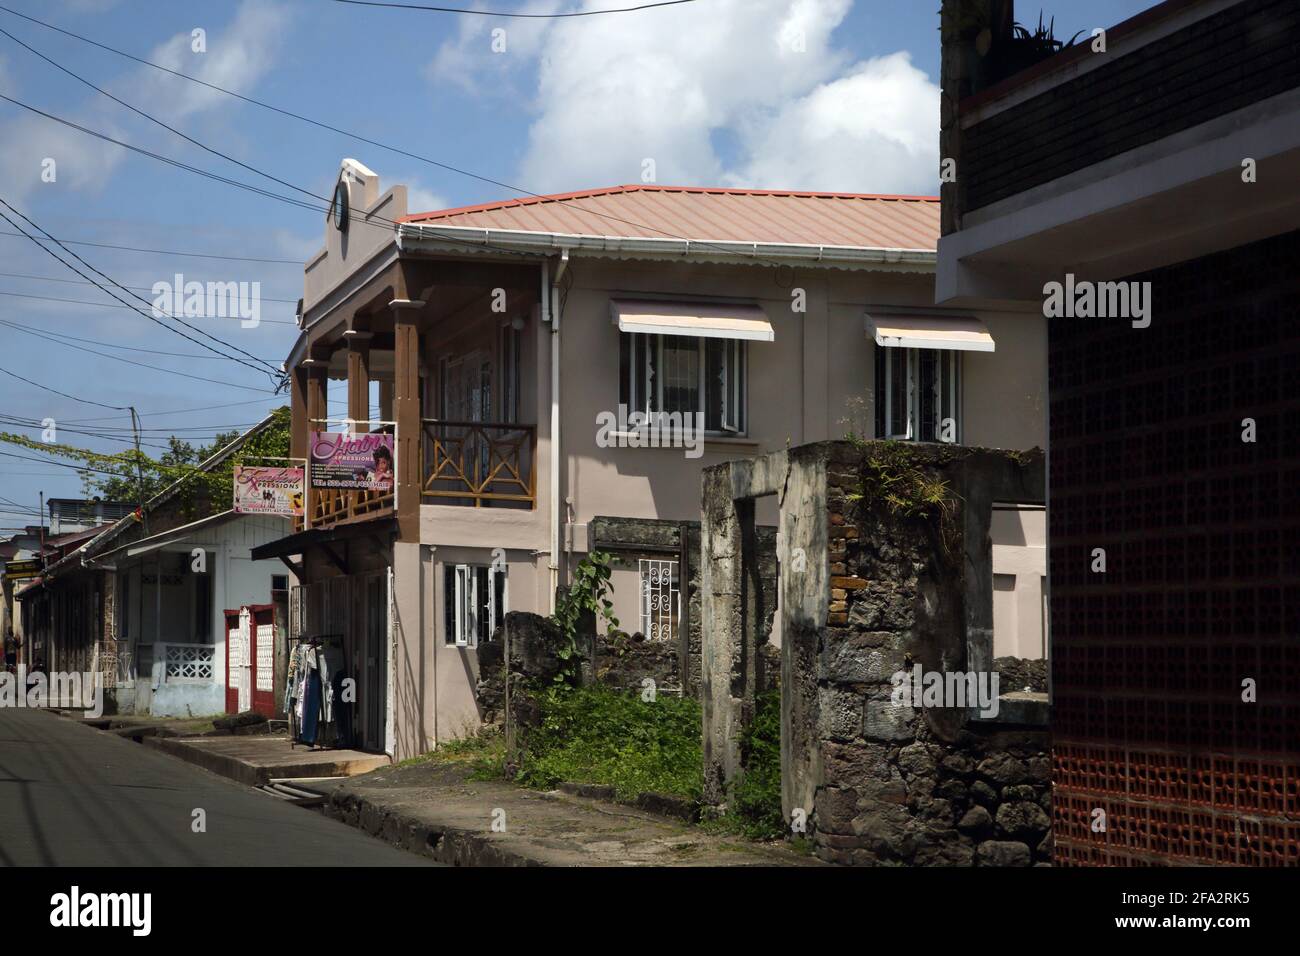 Gouyave Grenada  Street Scene xpressions hair and fashion shop and Rundown building Stock Photo